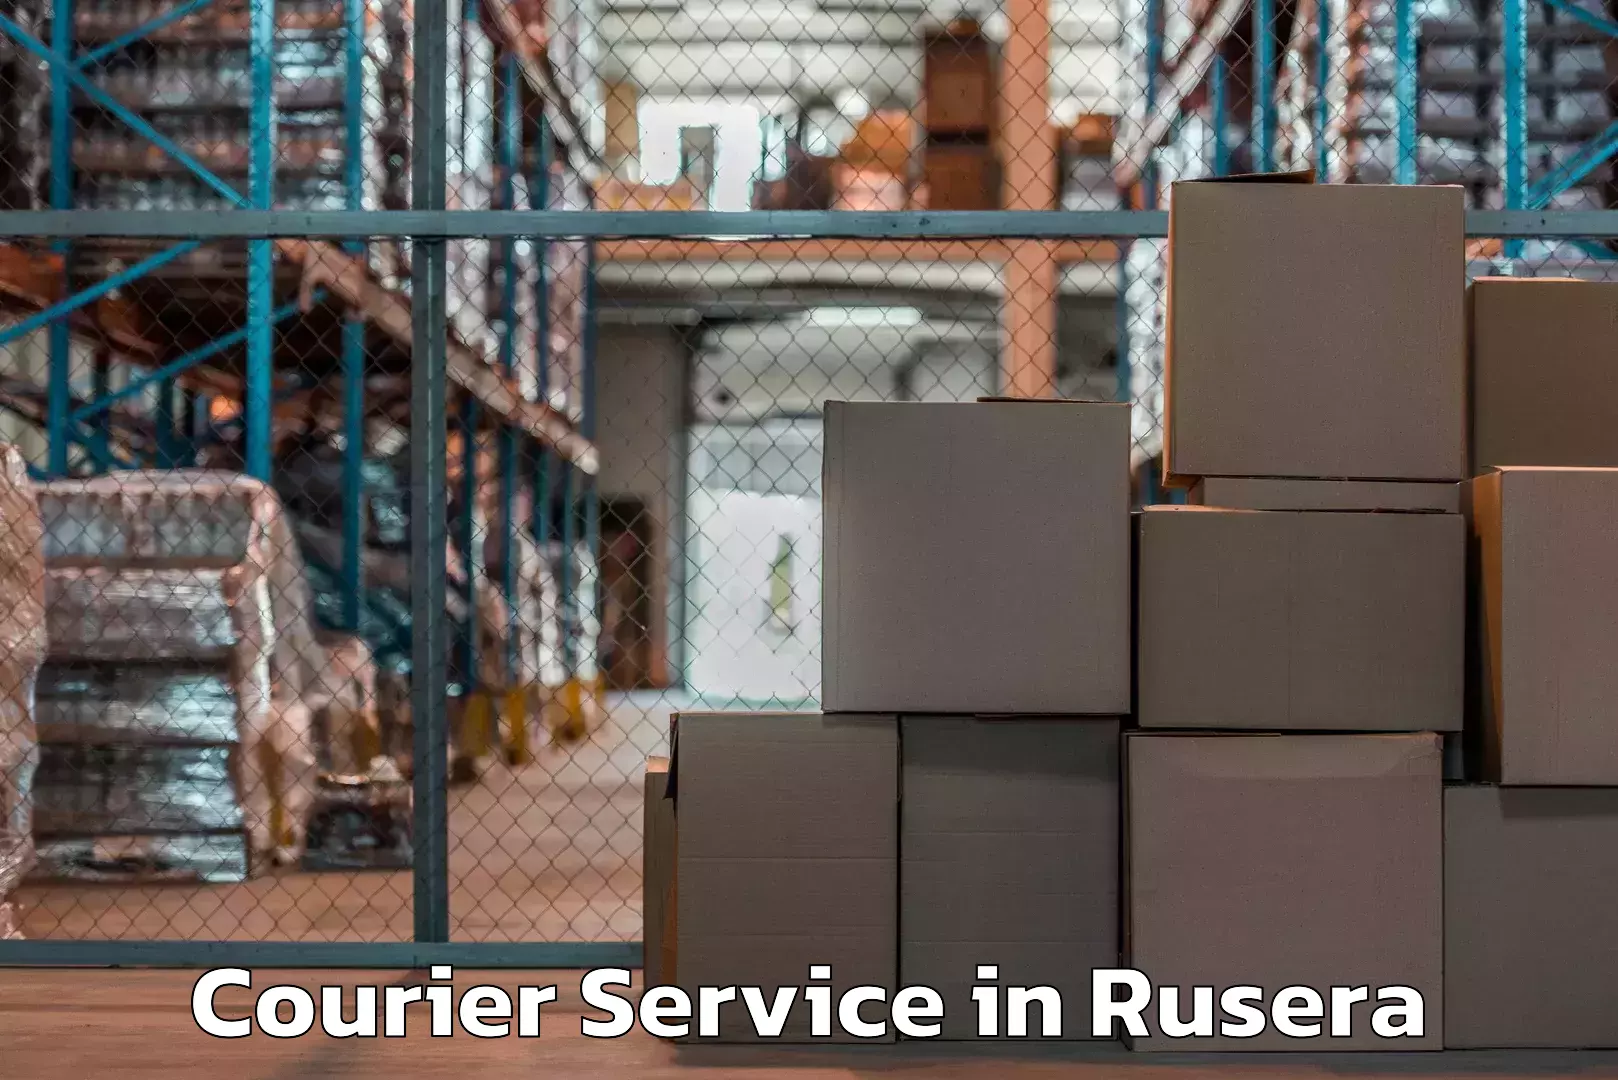 Courier services in Rusera